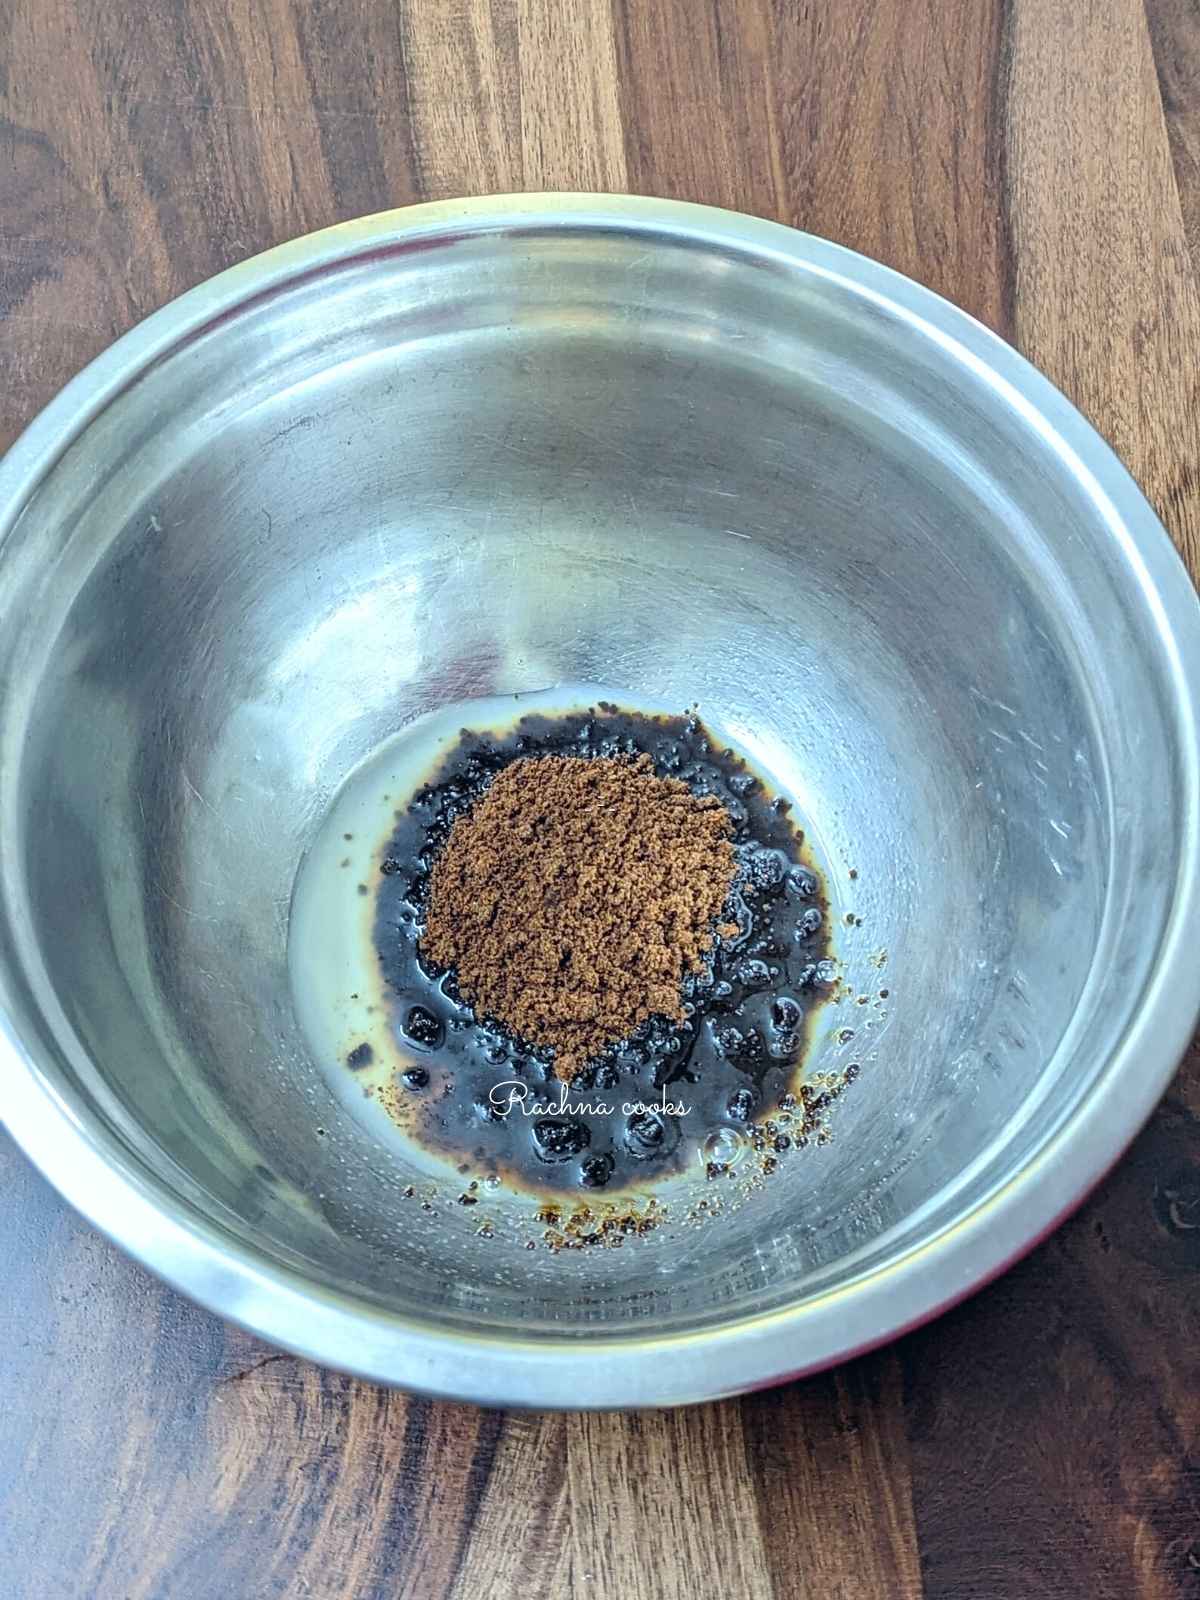 Brown sugar and lemon juice in a steel container